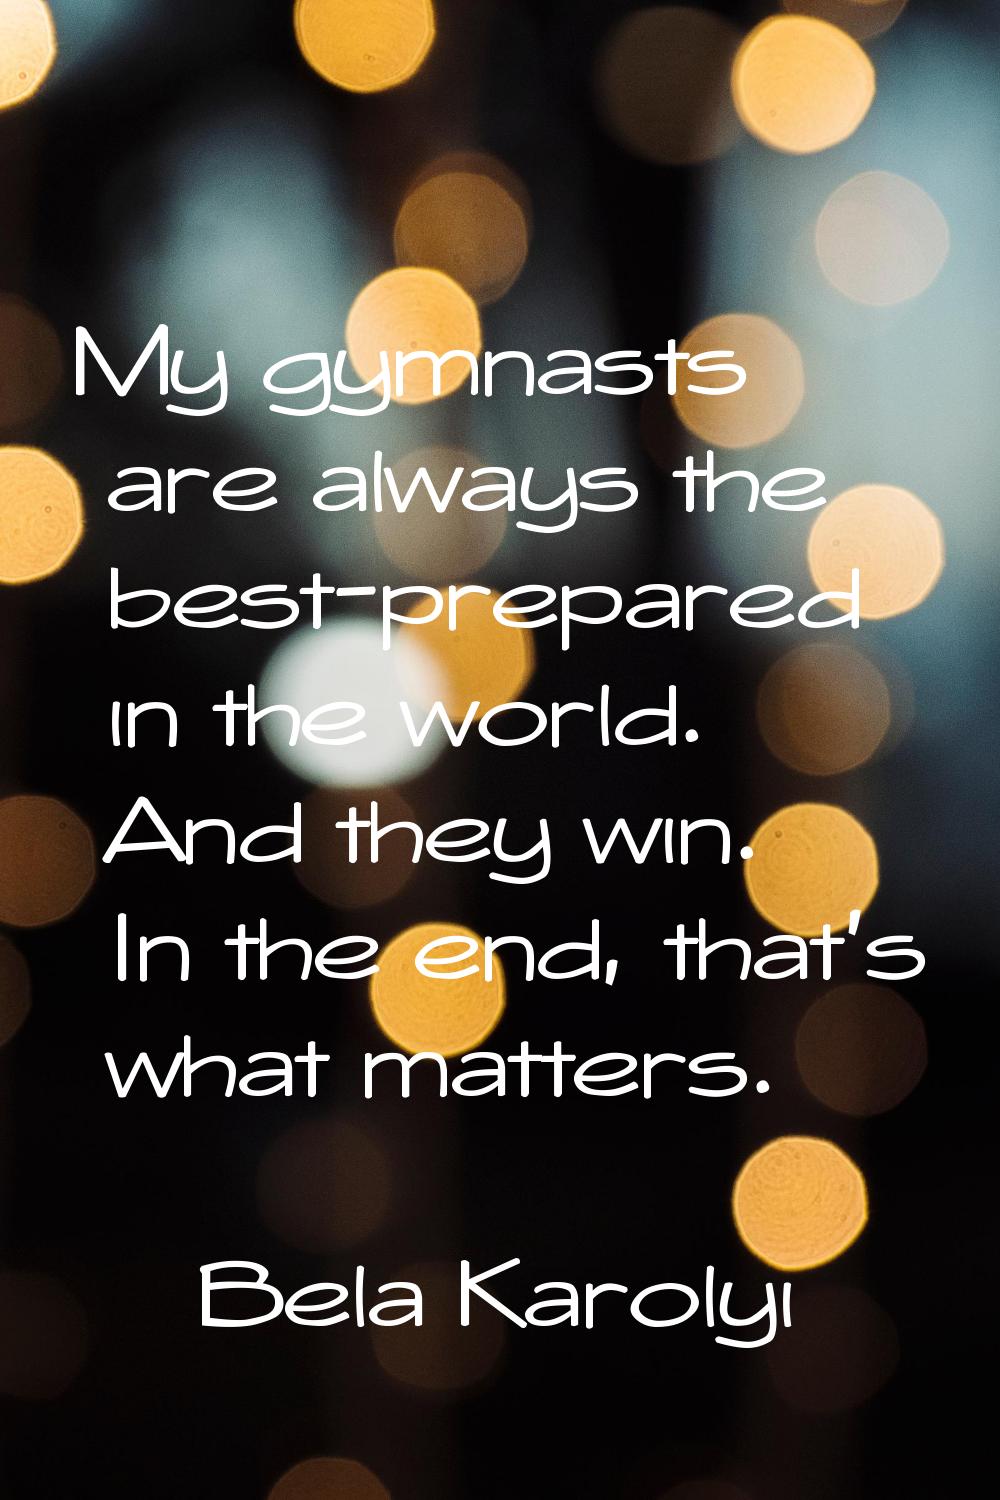 My gymnasts are always the best-prepared in the world. And they win. In the end, that's what matter